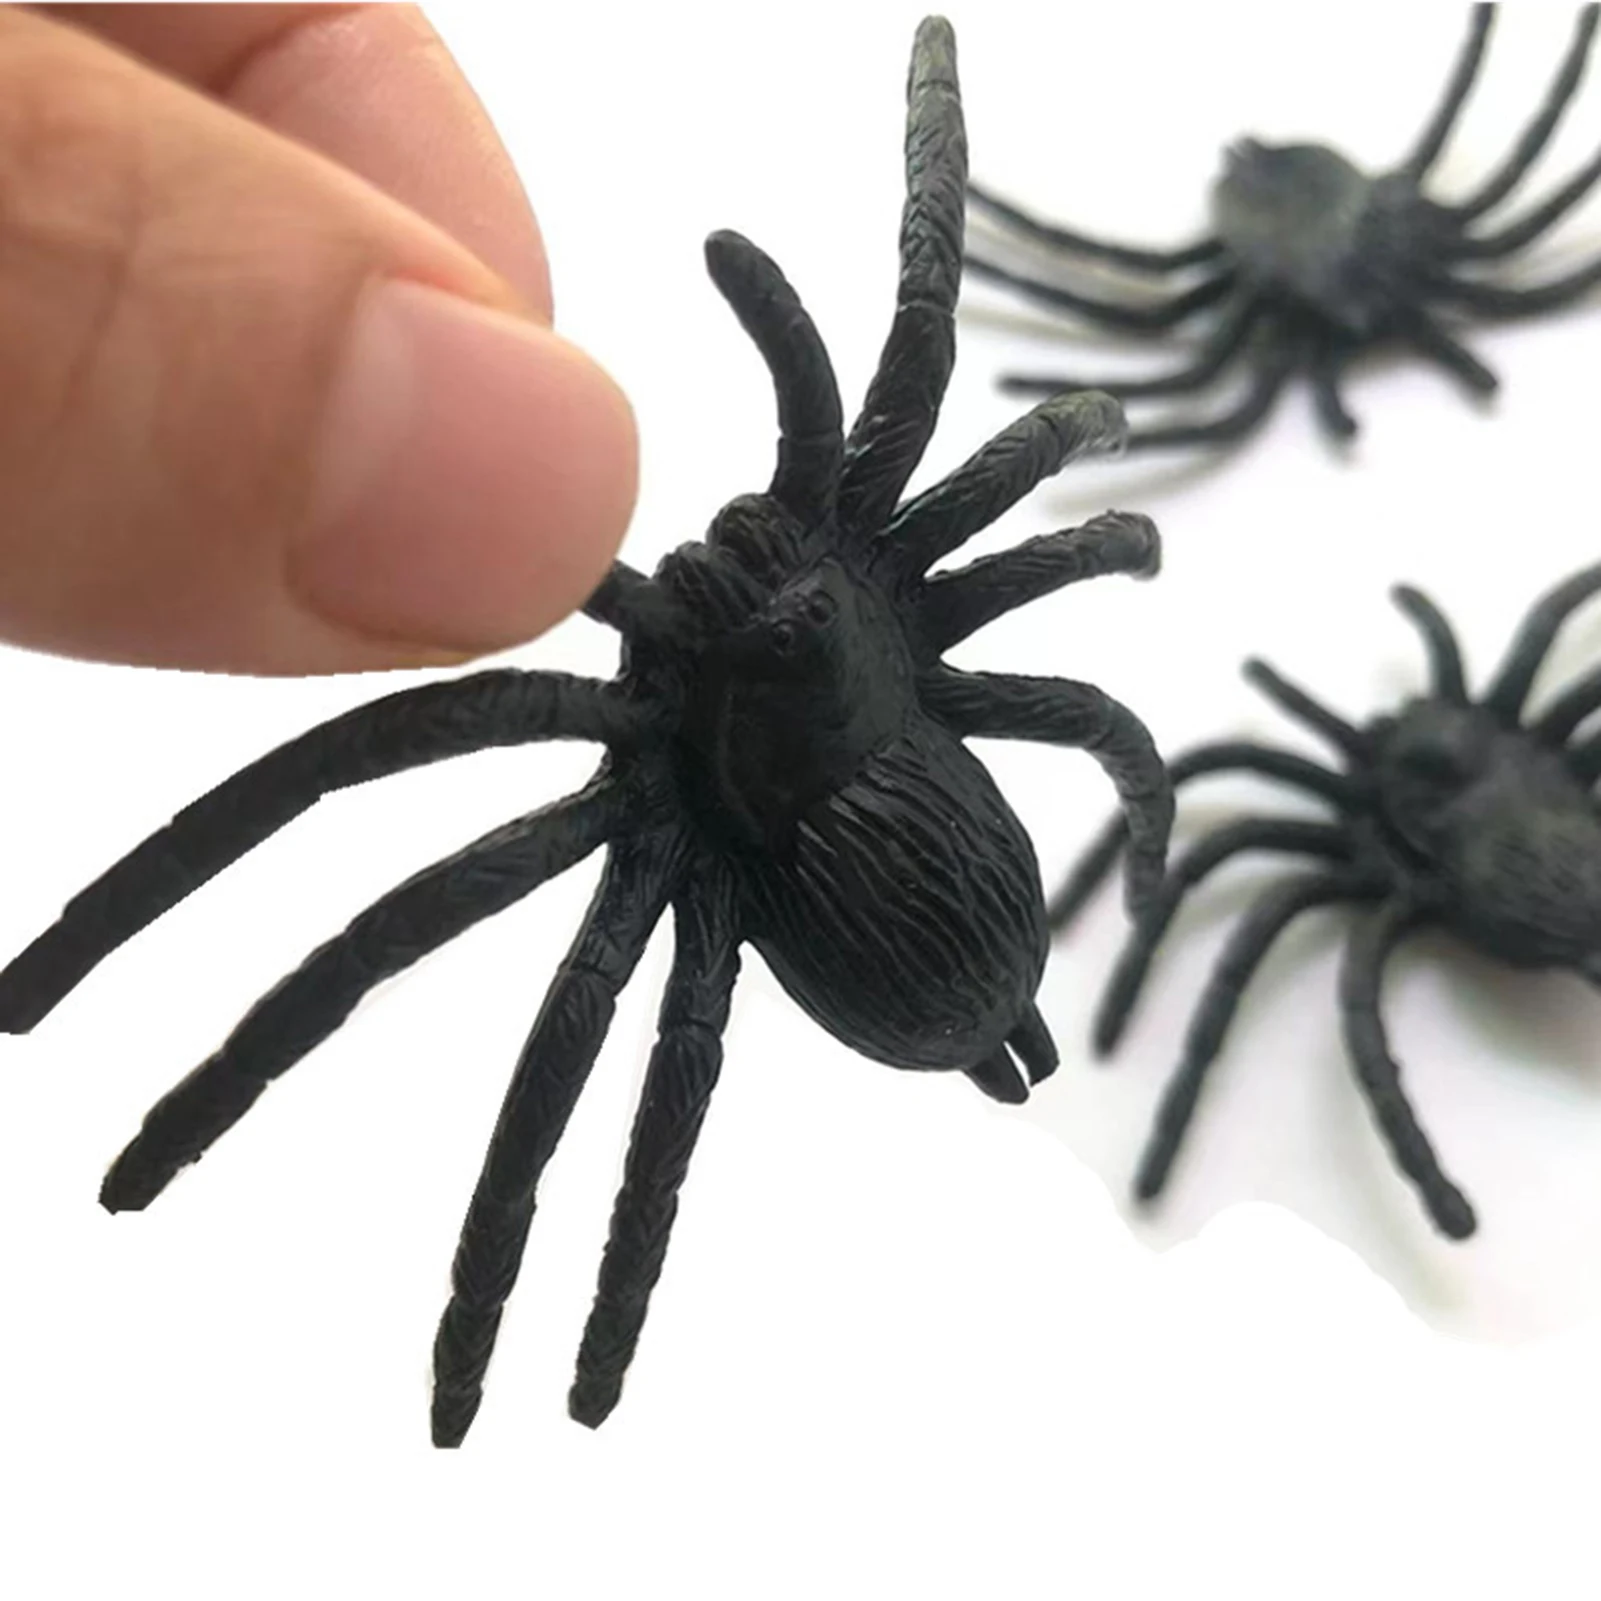 

50pcs Horror Black Spider Halloween Prank Fake Spider Terror Realistic Props Home Theme Party Haunted House Decoration Supplies